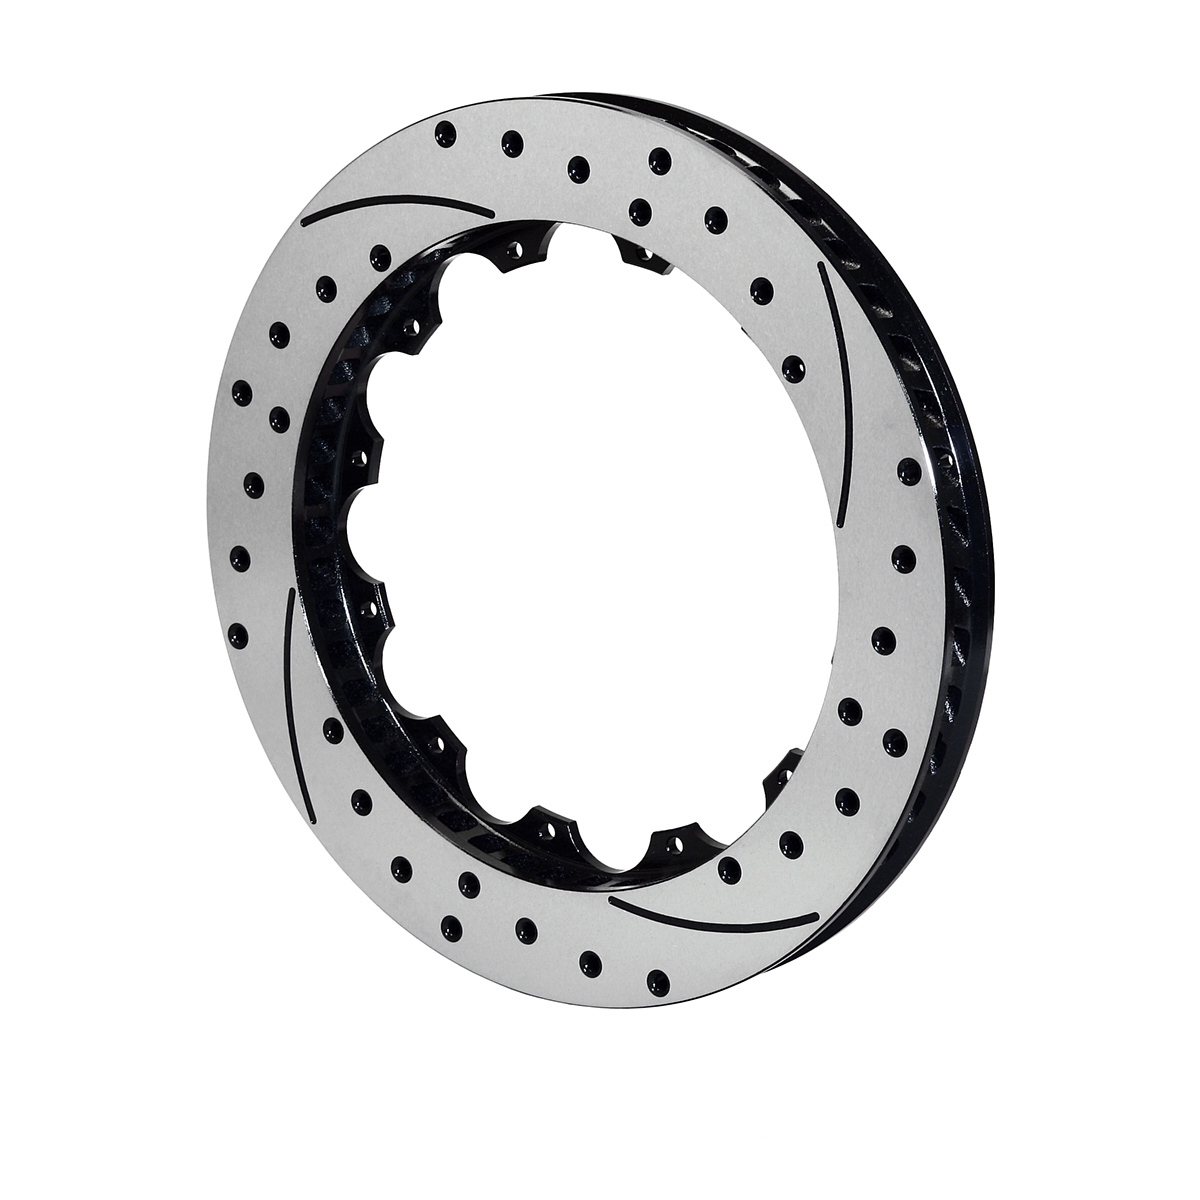 Wilwood 160-7799-BK Brake Rotor, SRP, Driver Side, Drilled / Slotted, 13.06 in OD, 1.25 in Thick, 12 x 8.75 in Bolt Pattern, Iron, Black Paint, Each